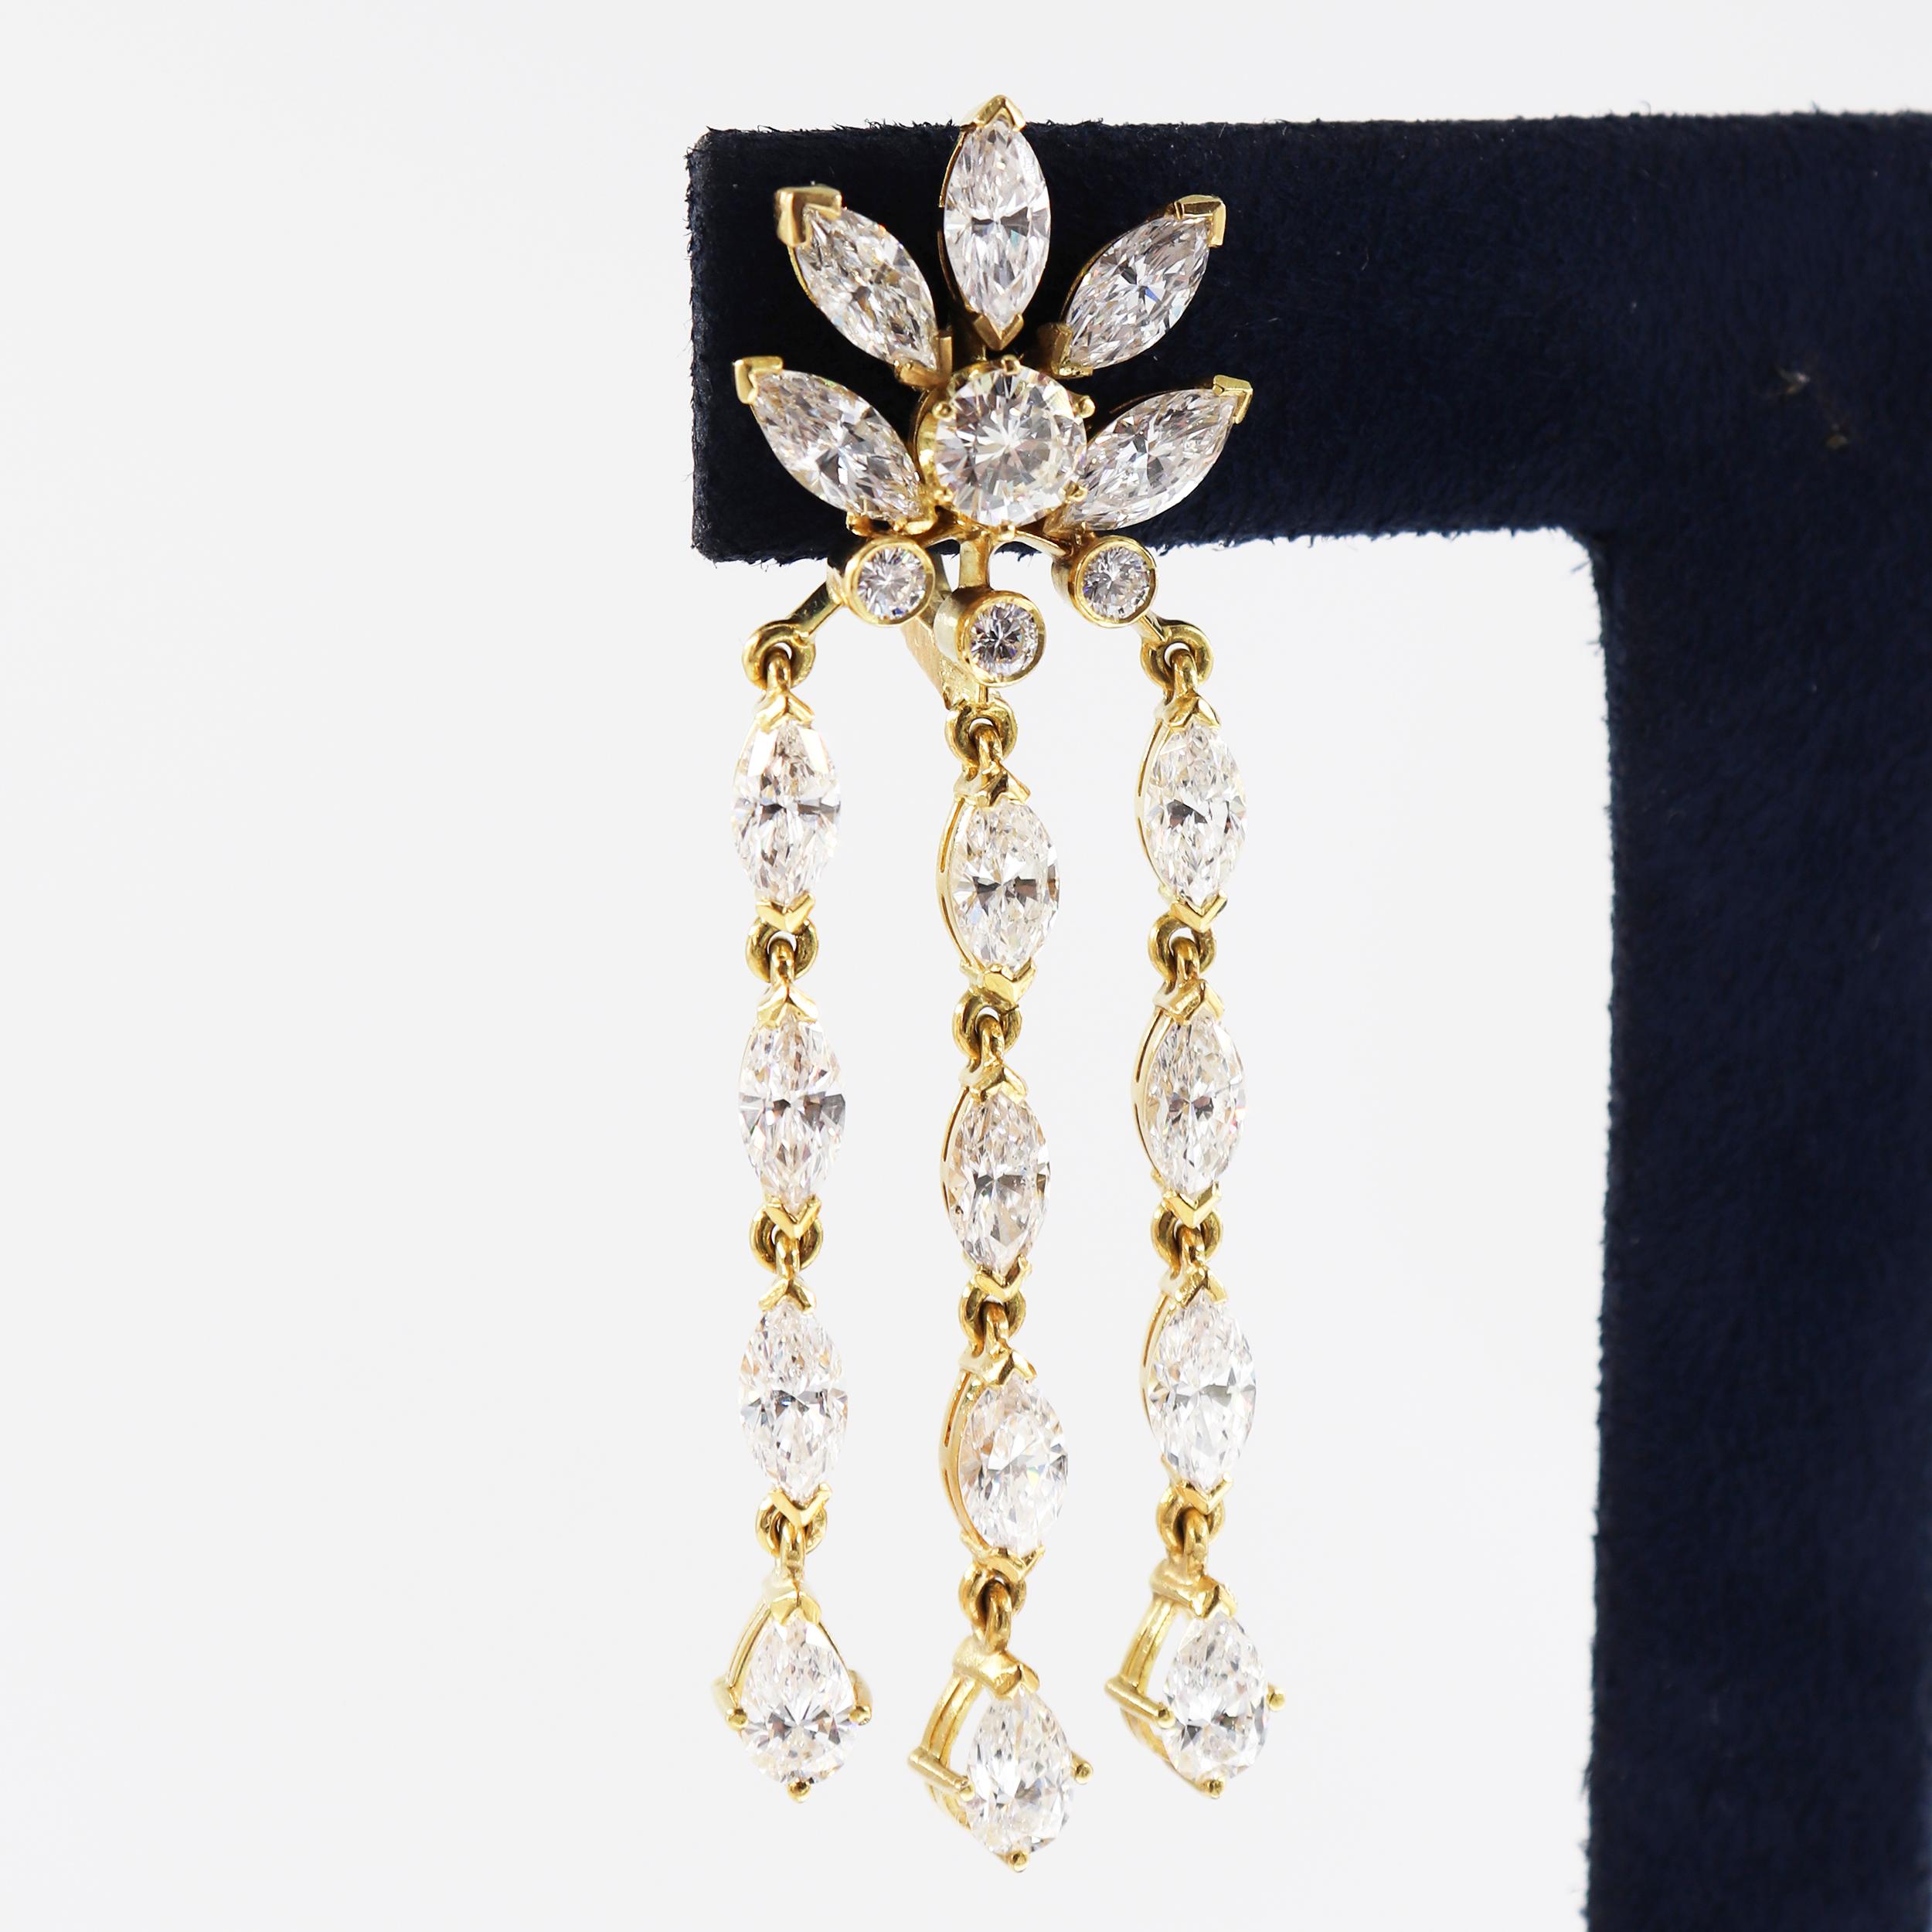 Those earrings, crafted in 18 karat yellow Gold, feature assorted round brilliants, marquises, and Pears shape diamonds for a total weight of approximately +13 carat. 

Stamped '750'

Type: Dangle Earrings
Stones: Diamonds
Cut: Round Brilliants,